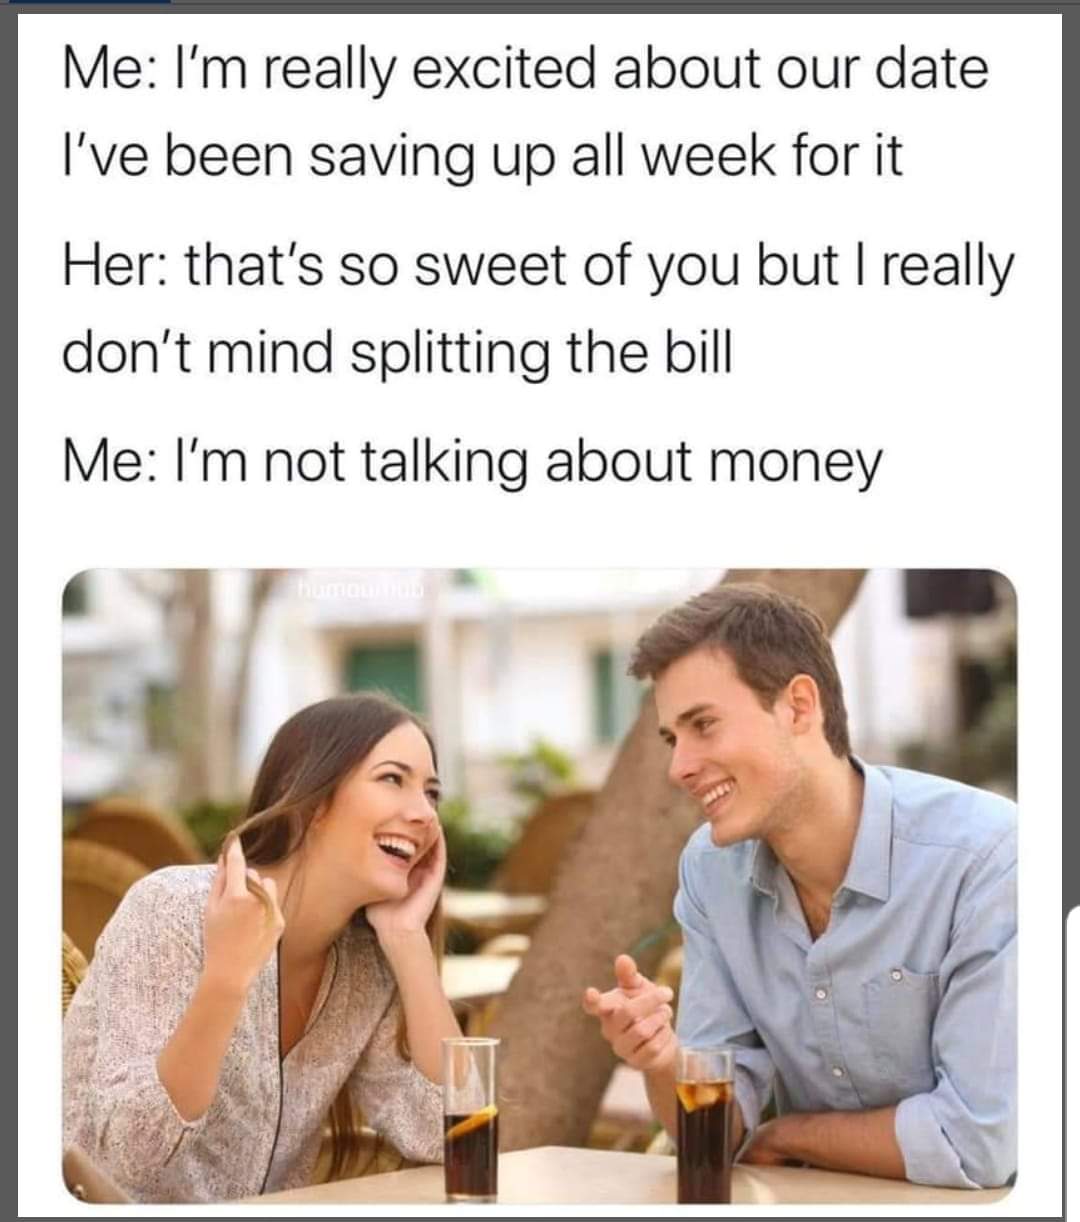 relationship memes - you are so beautiful funny - Me I'm really excited about our date I've been saving up all week for it Her that's so sweet of you but I really don't mind splitting the bill Me I'm not talking about money hummum